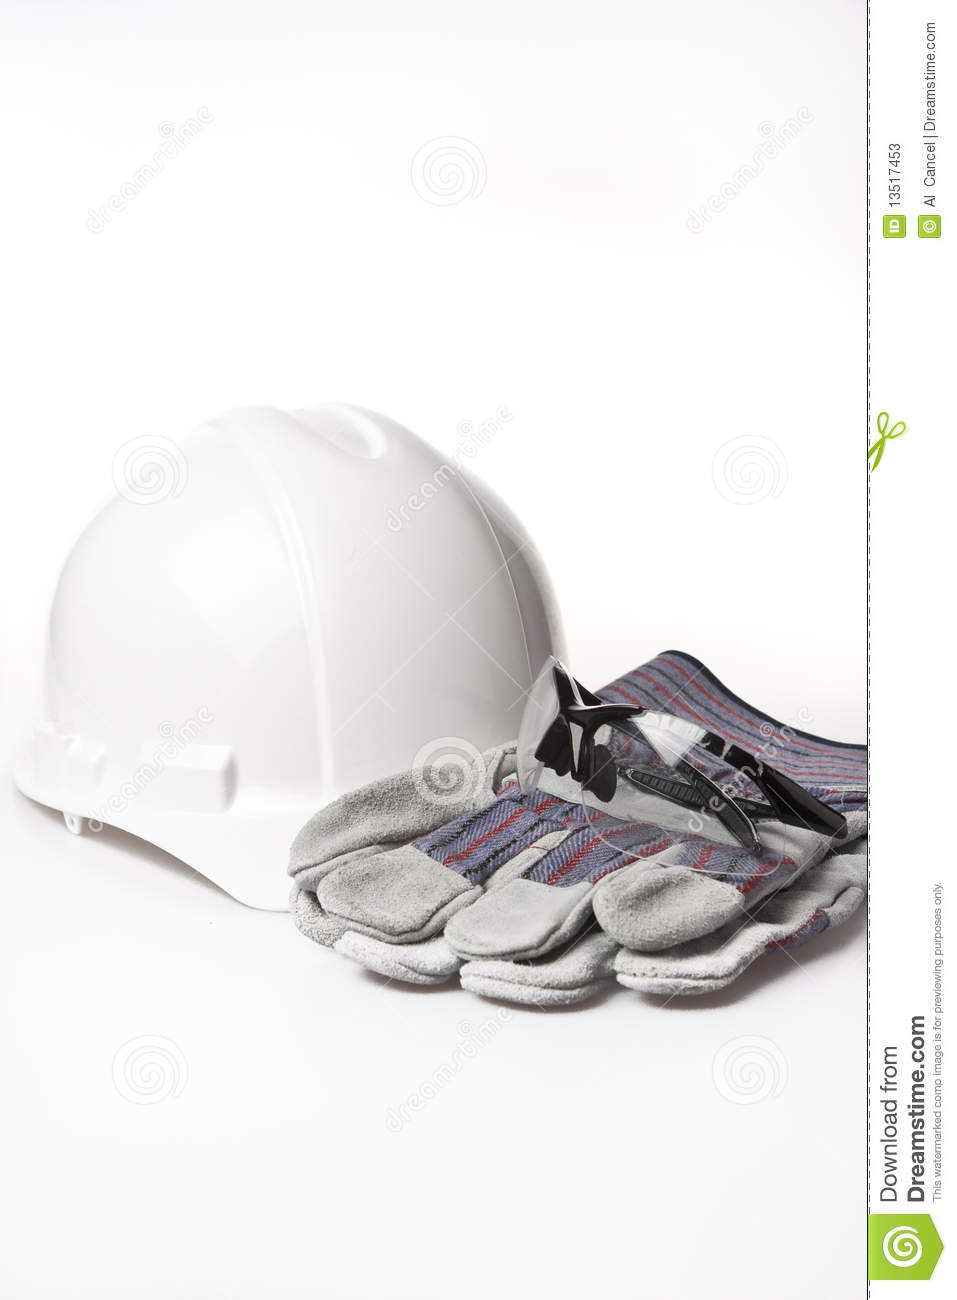 Personal Protective Equipment Hardhat Stock Photos   Image  13517453